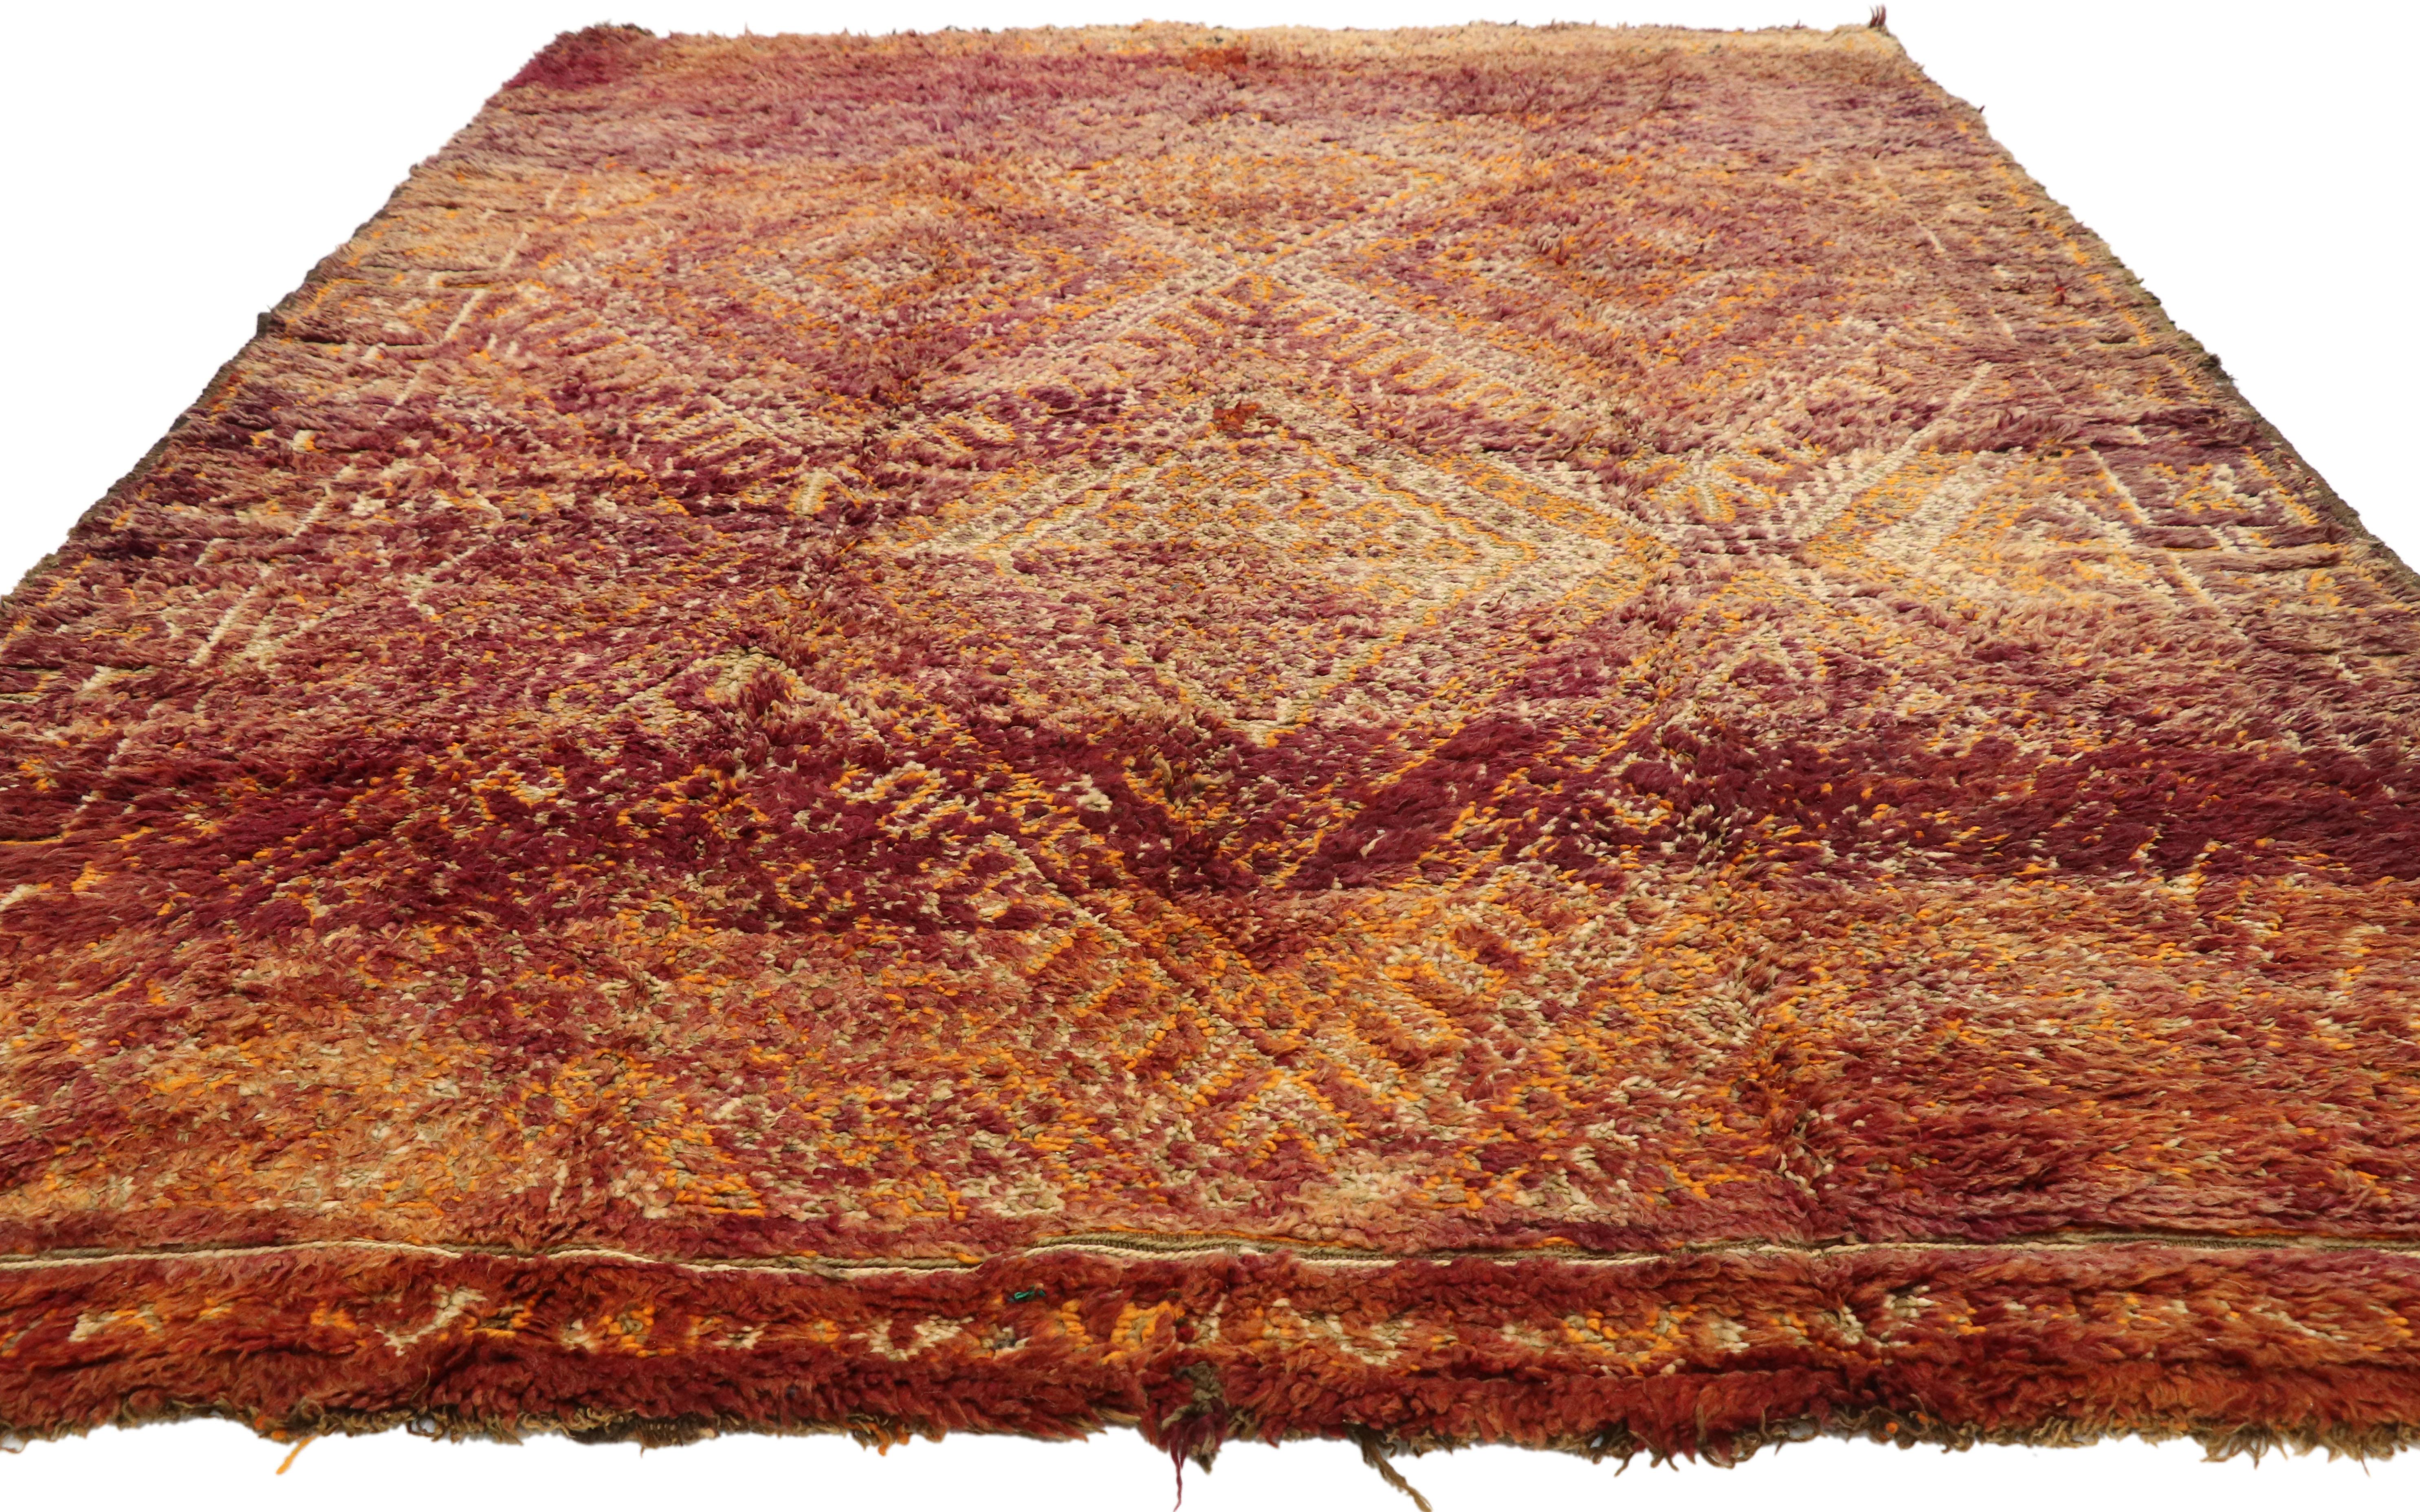 Tribal Vintage Beni M'Guild Moroccan Rug with a Diamond Pattern in Warm, Spicy Hues